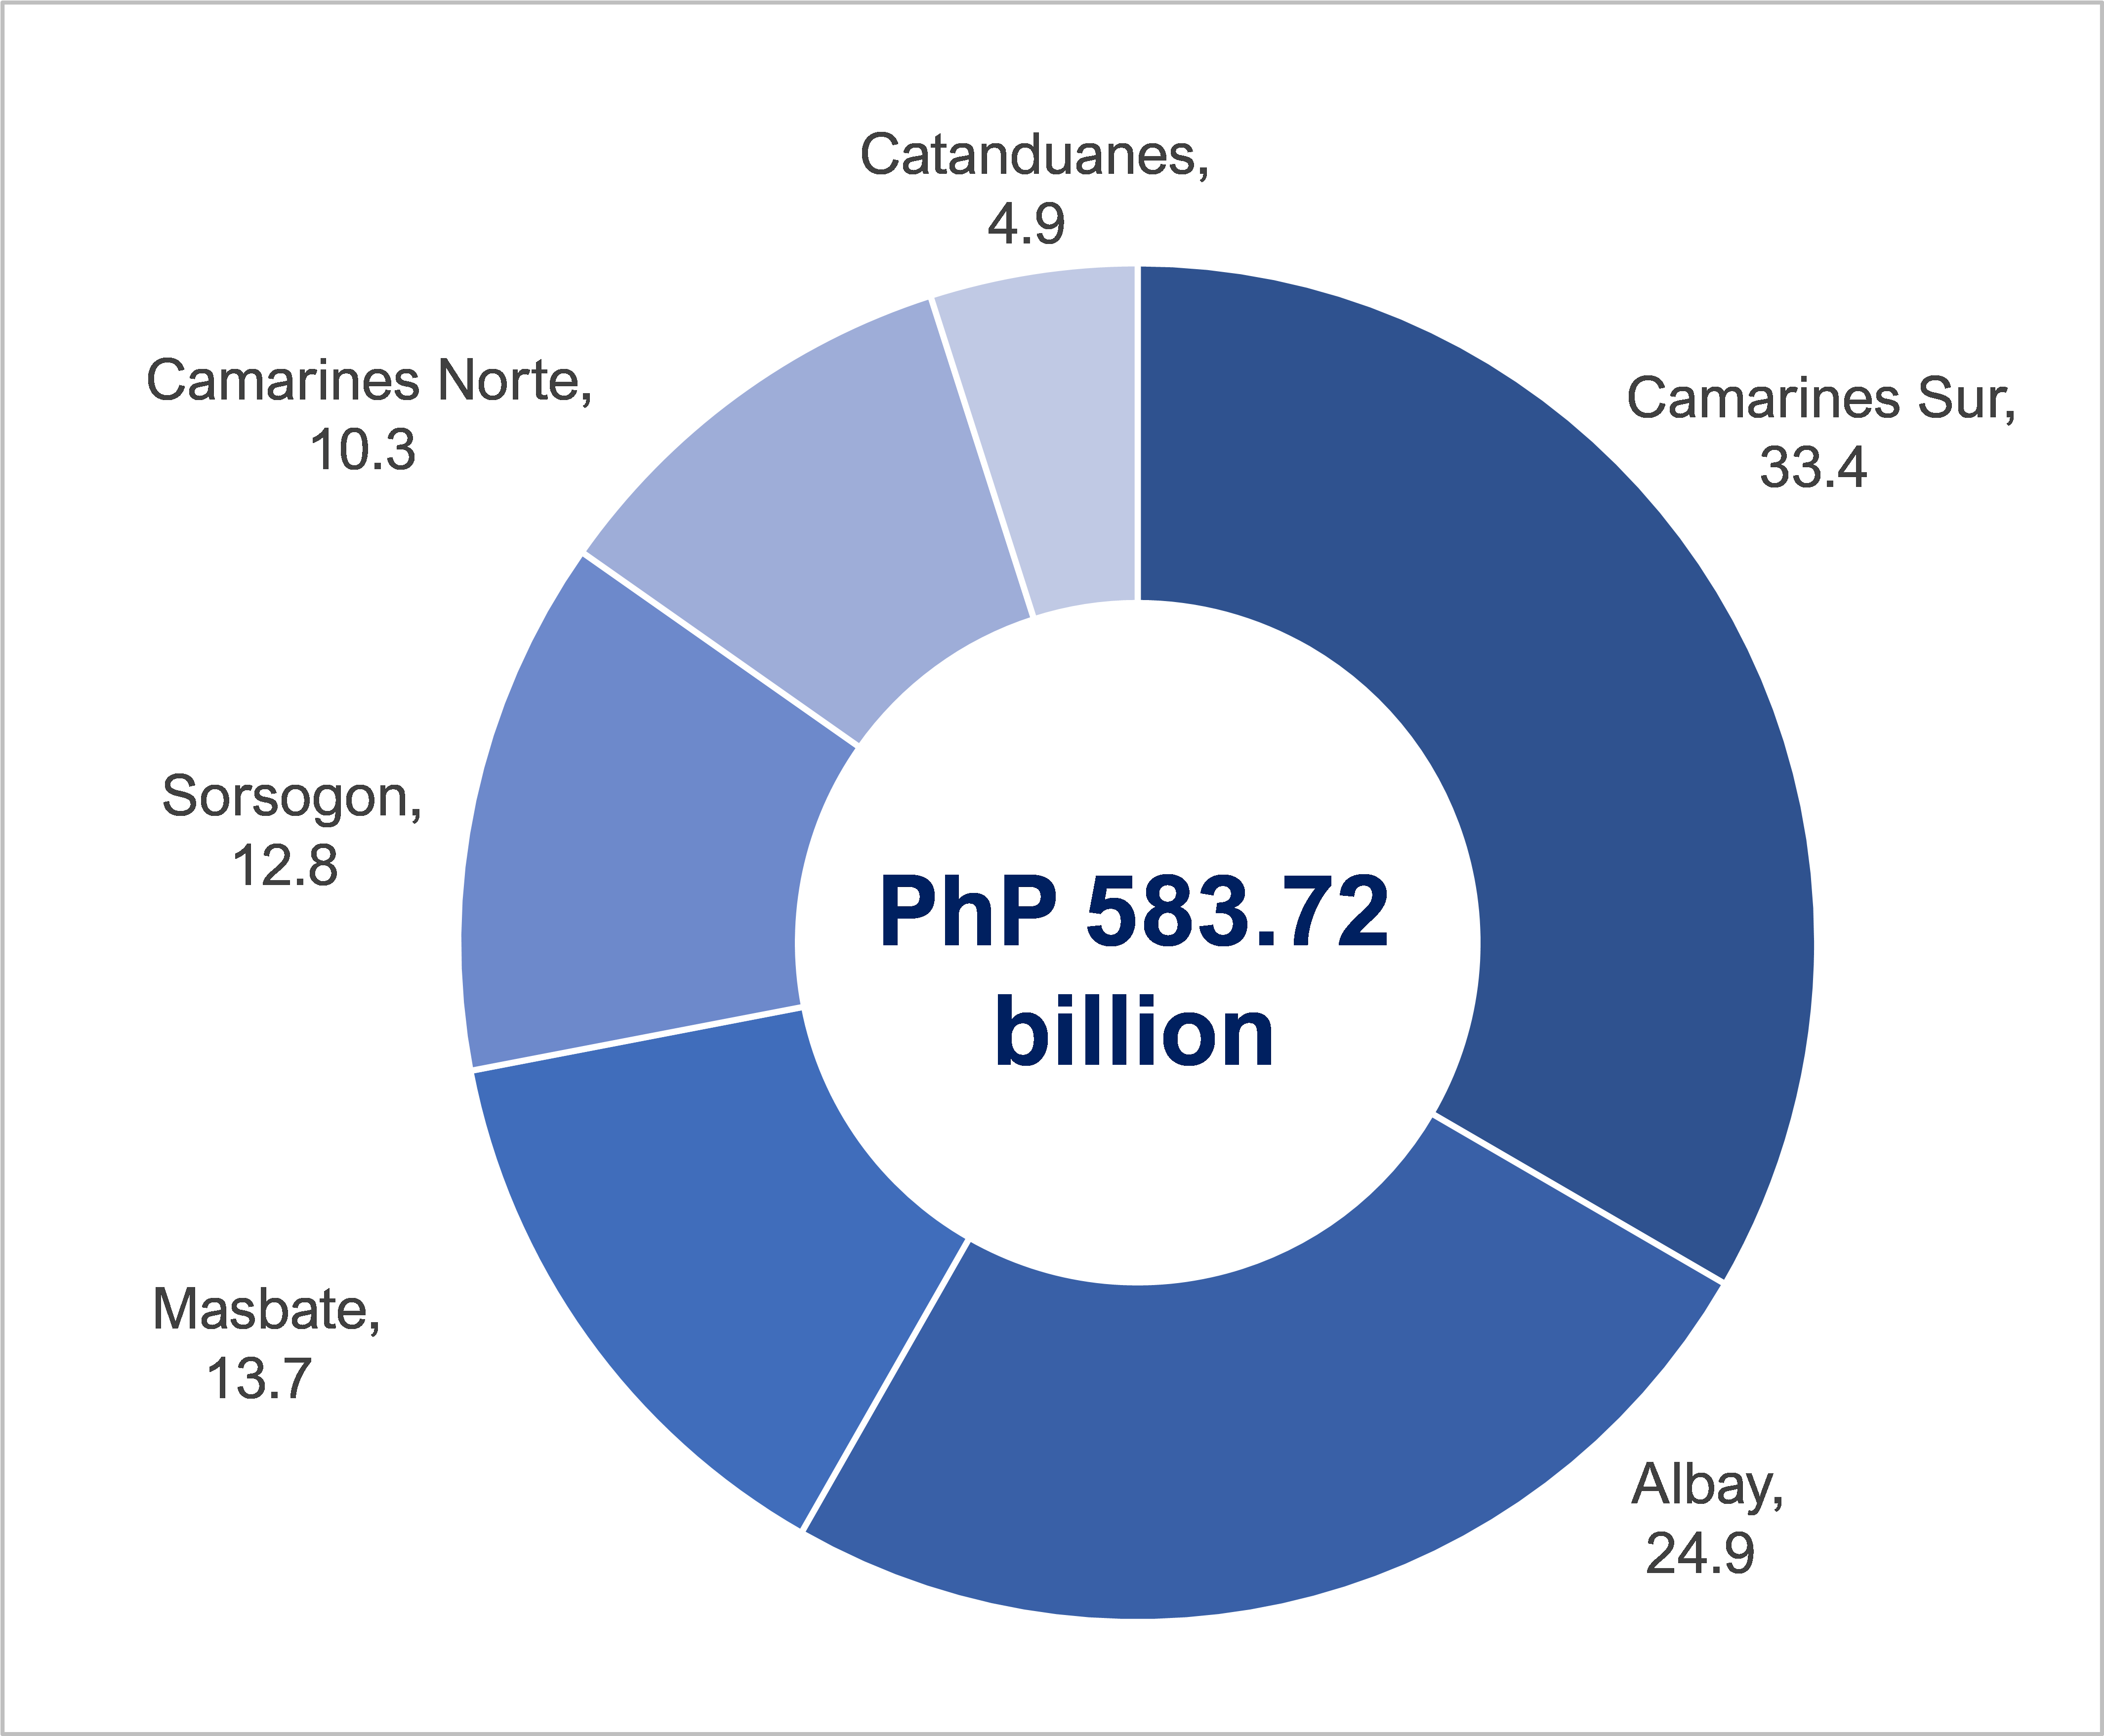 Share of Provinces to Bicol Region's GDP